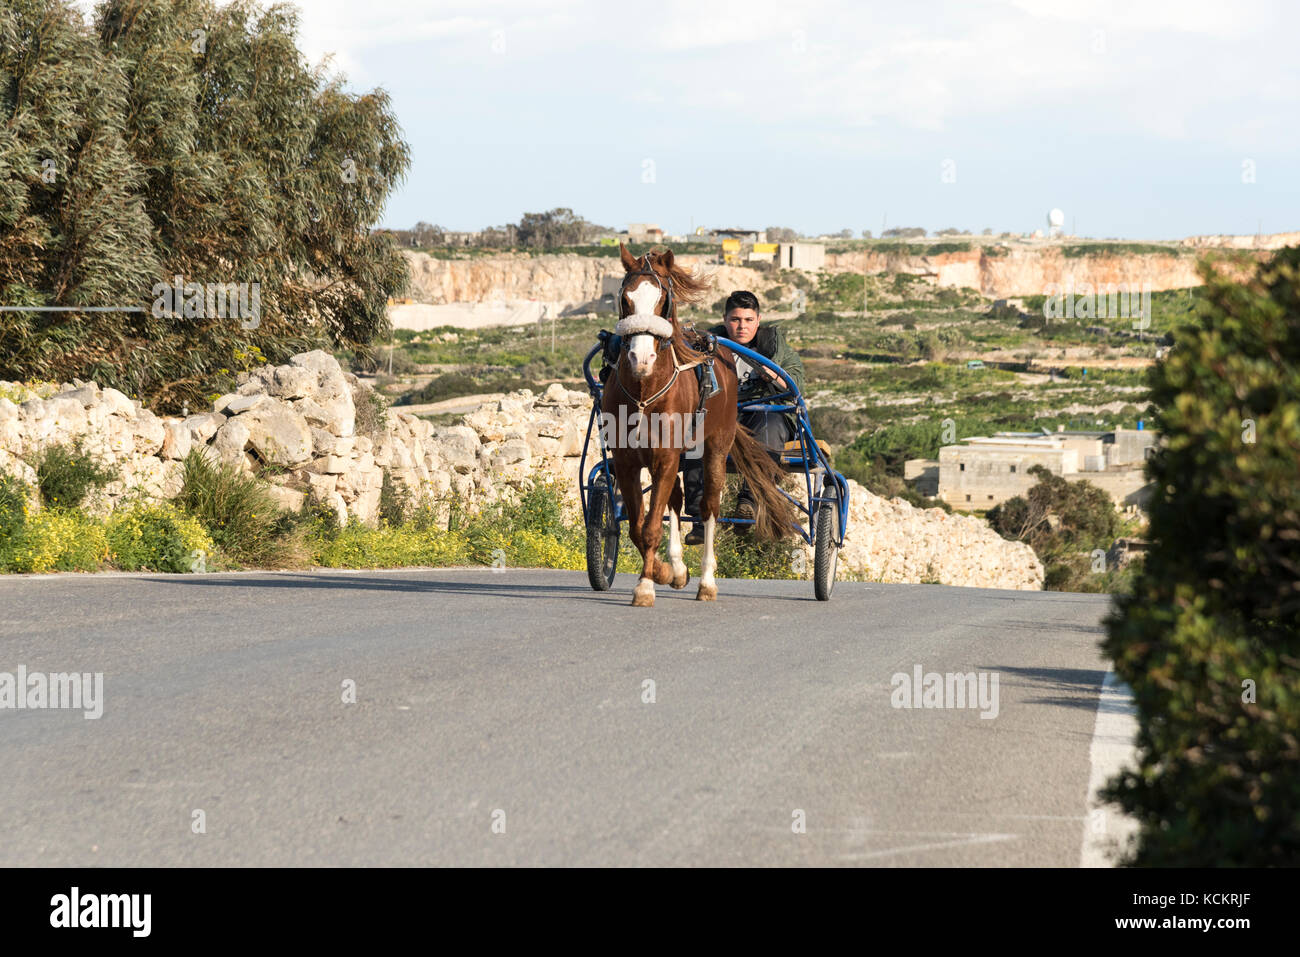 A man driving a racing horse and cart or carriage on a road in the countryside in Malta Stock Photo